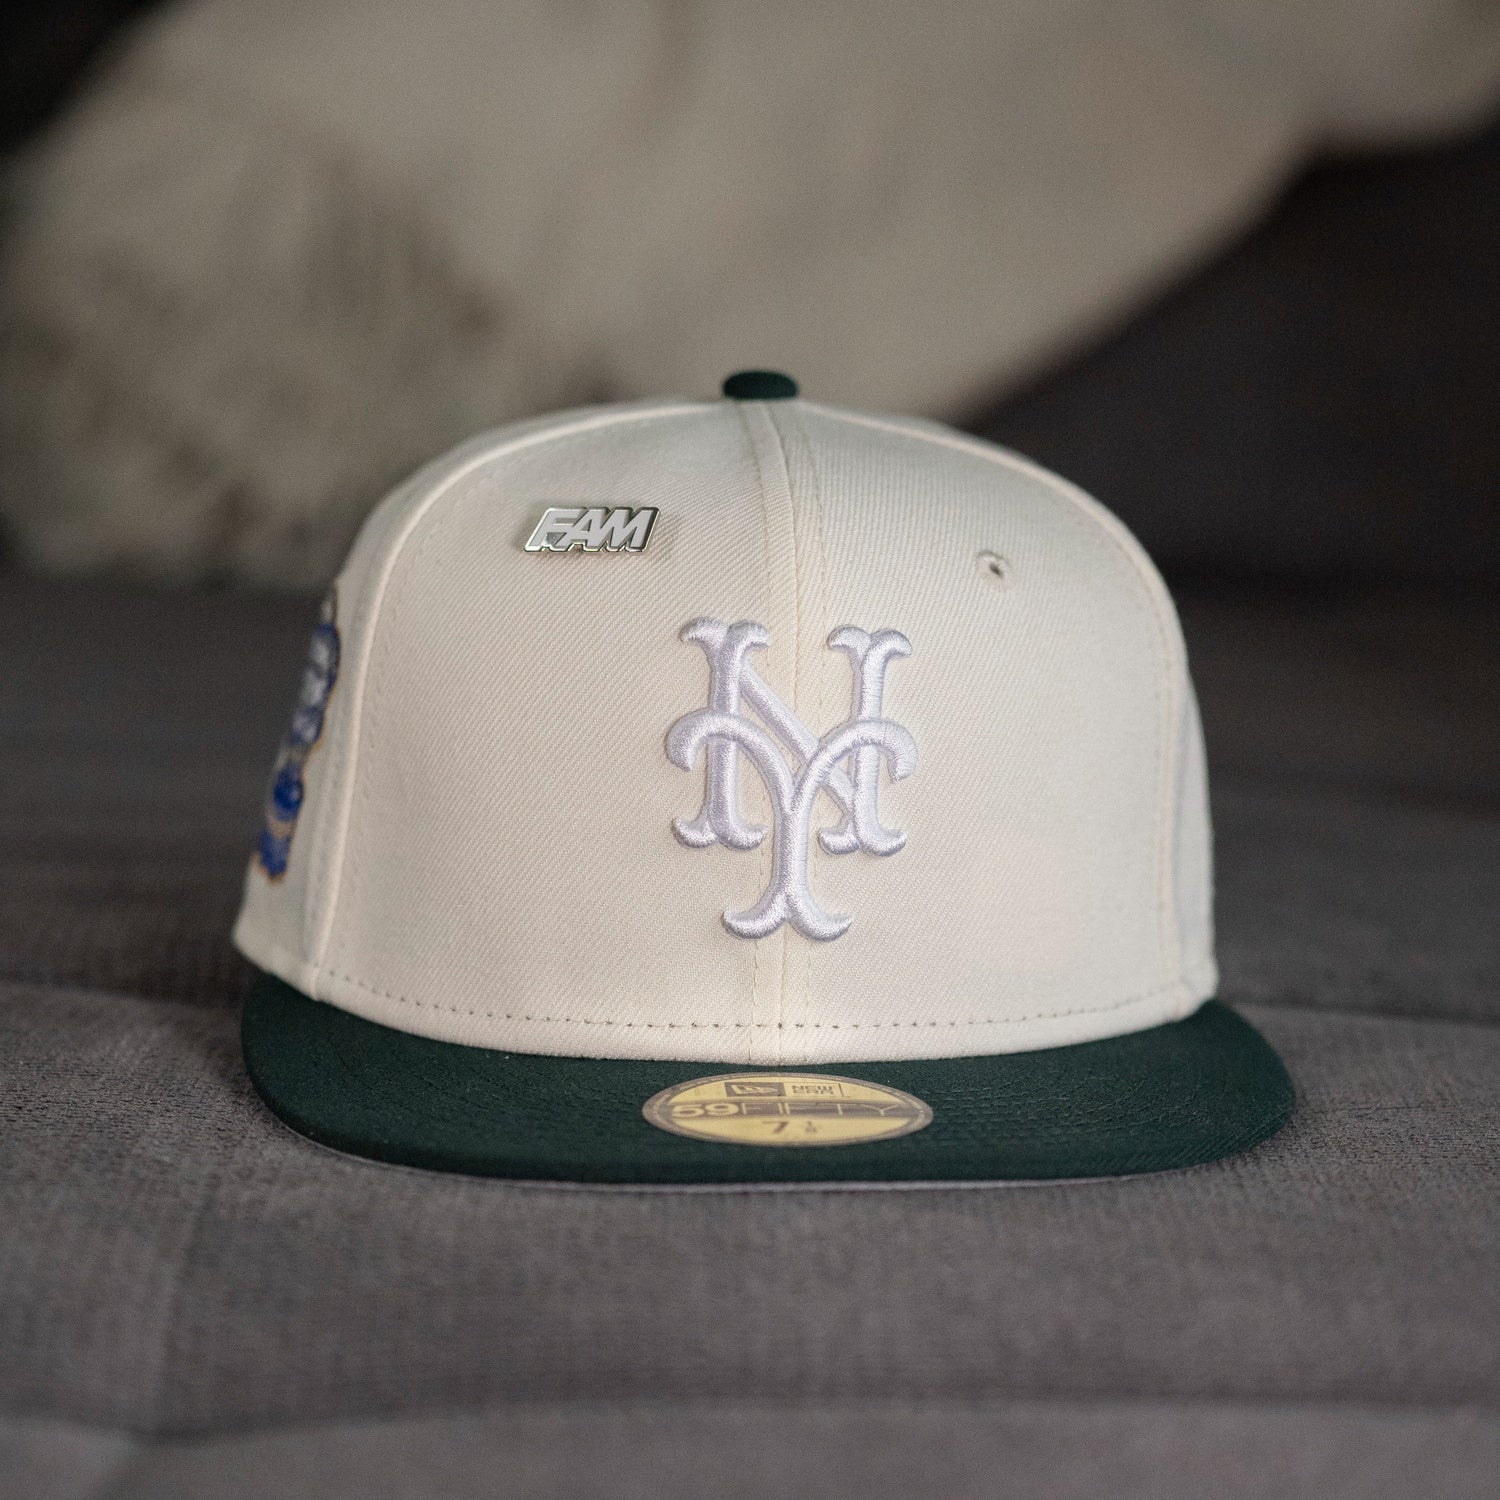 NEW ERA 59FIFTY MLB NEW YORK METS ALL STAR GAME 1964 TWO TONE / GREY UV FITTED CAP